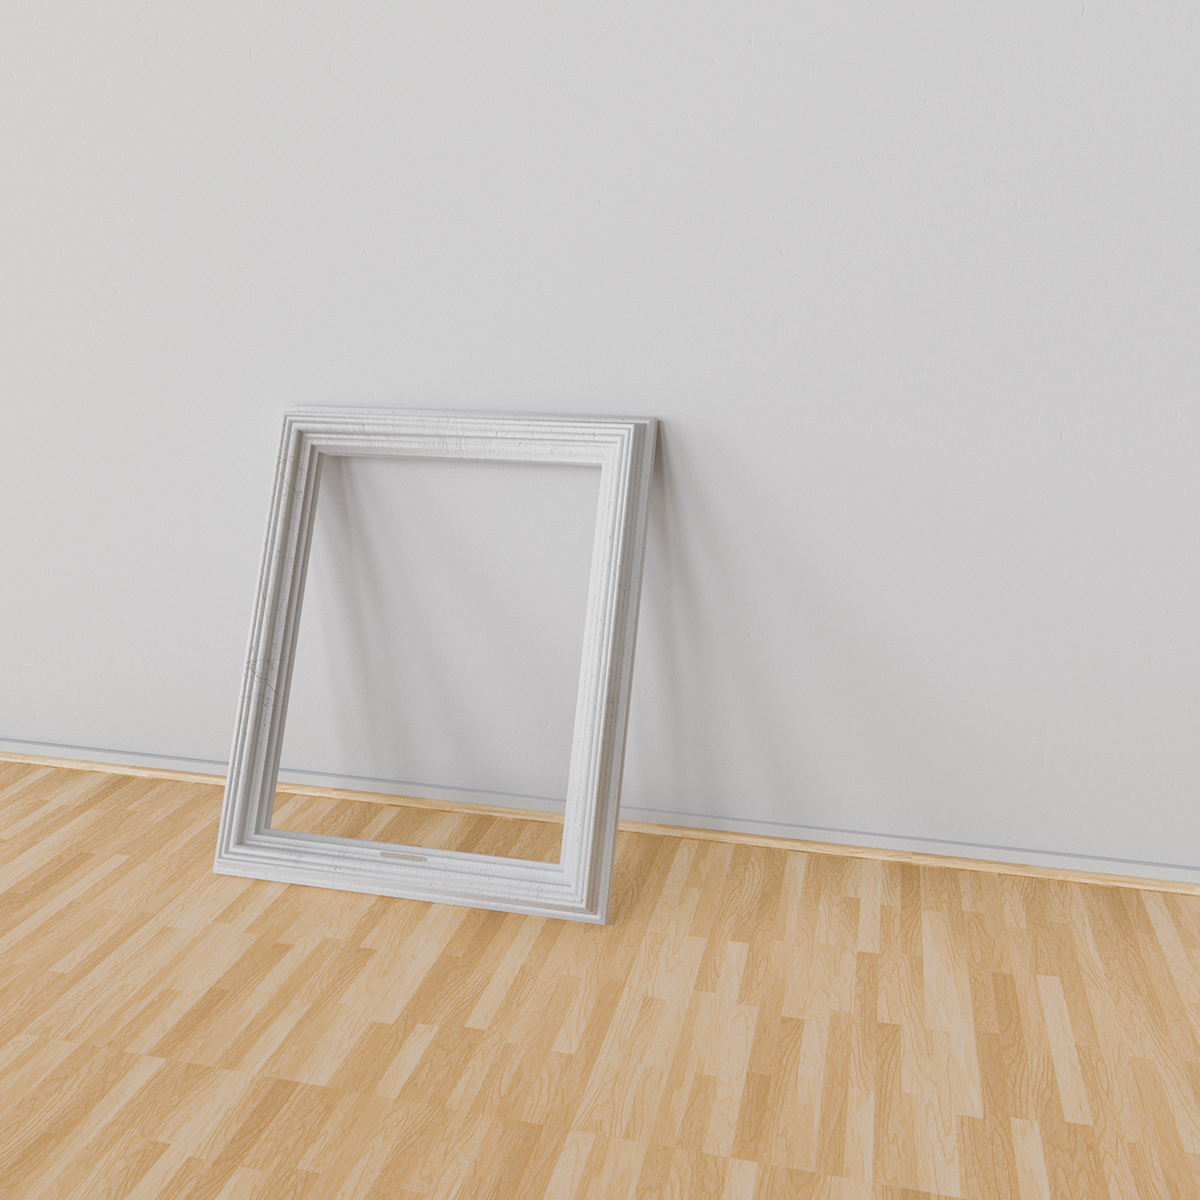 Photography  art fine staged museum Minimalism minimal gallery White conceptual